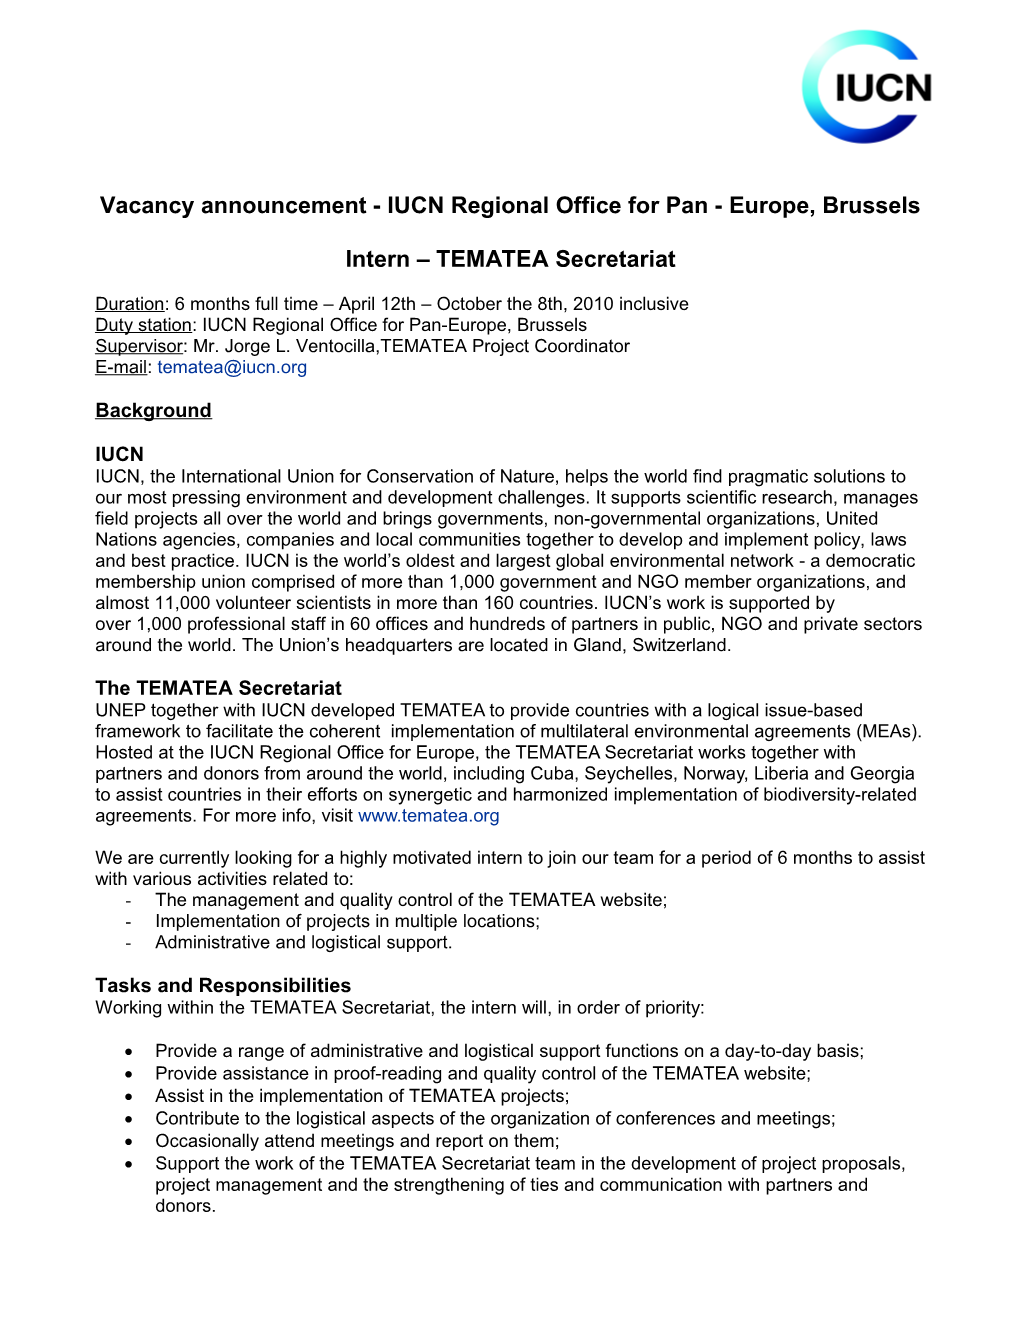 Vacancy Announcement - IUCN Regional Office for Pan- Europe,Brussels